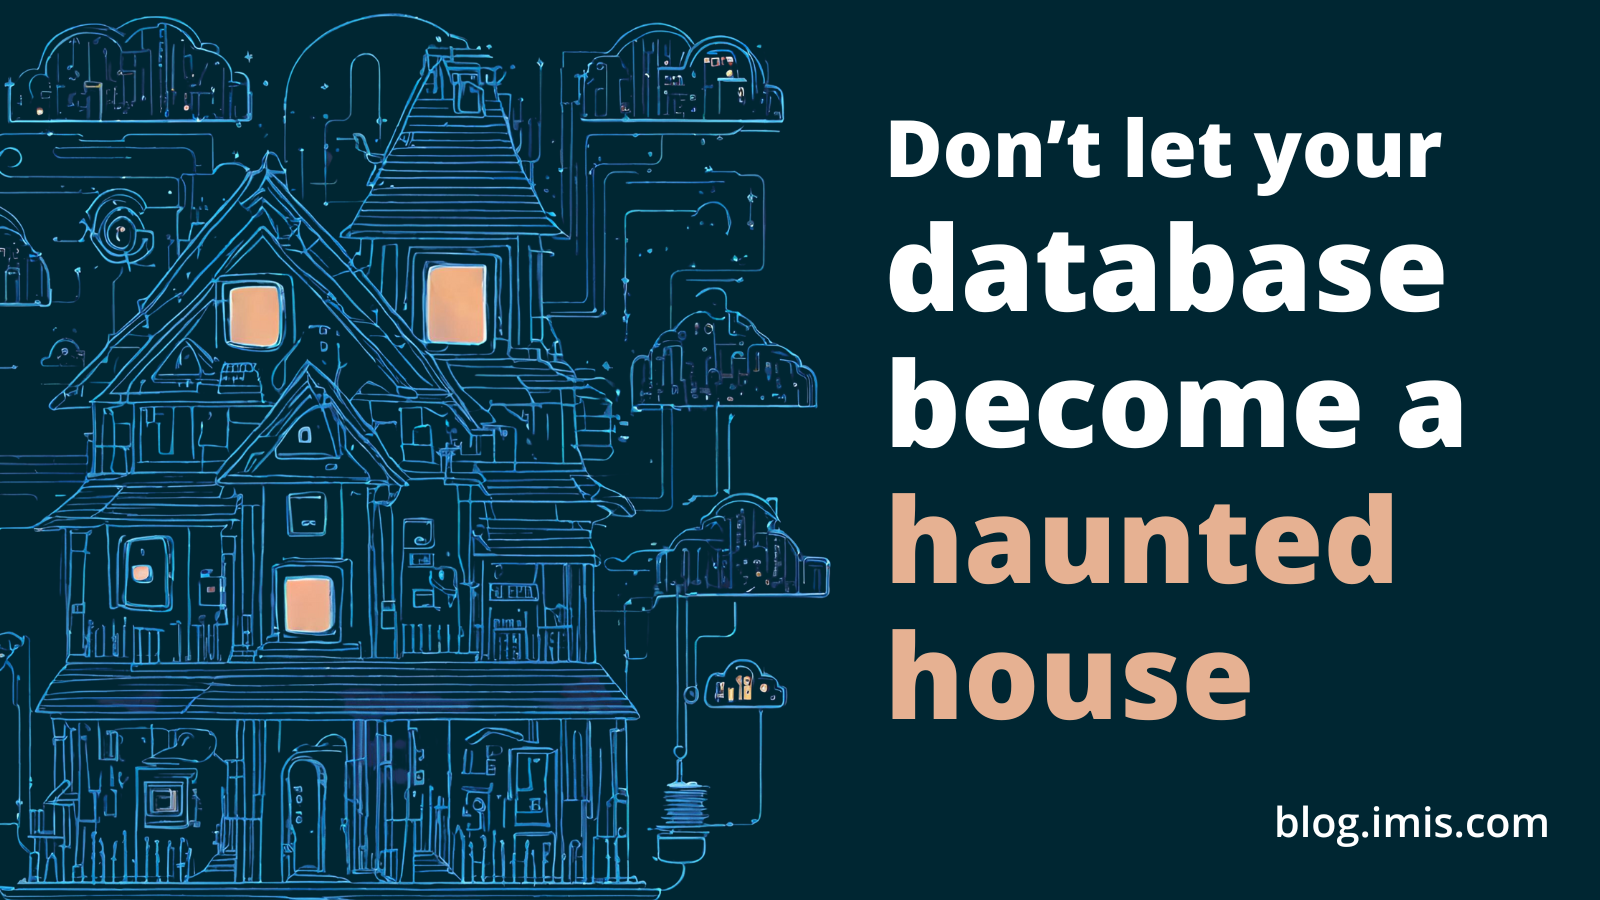 Don't let your database become a haunted house